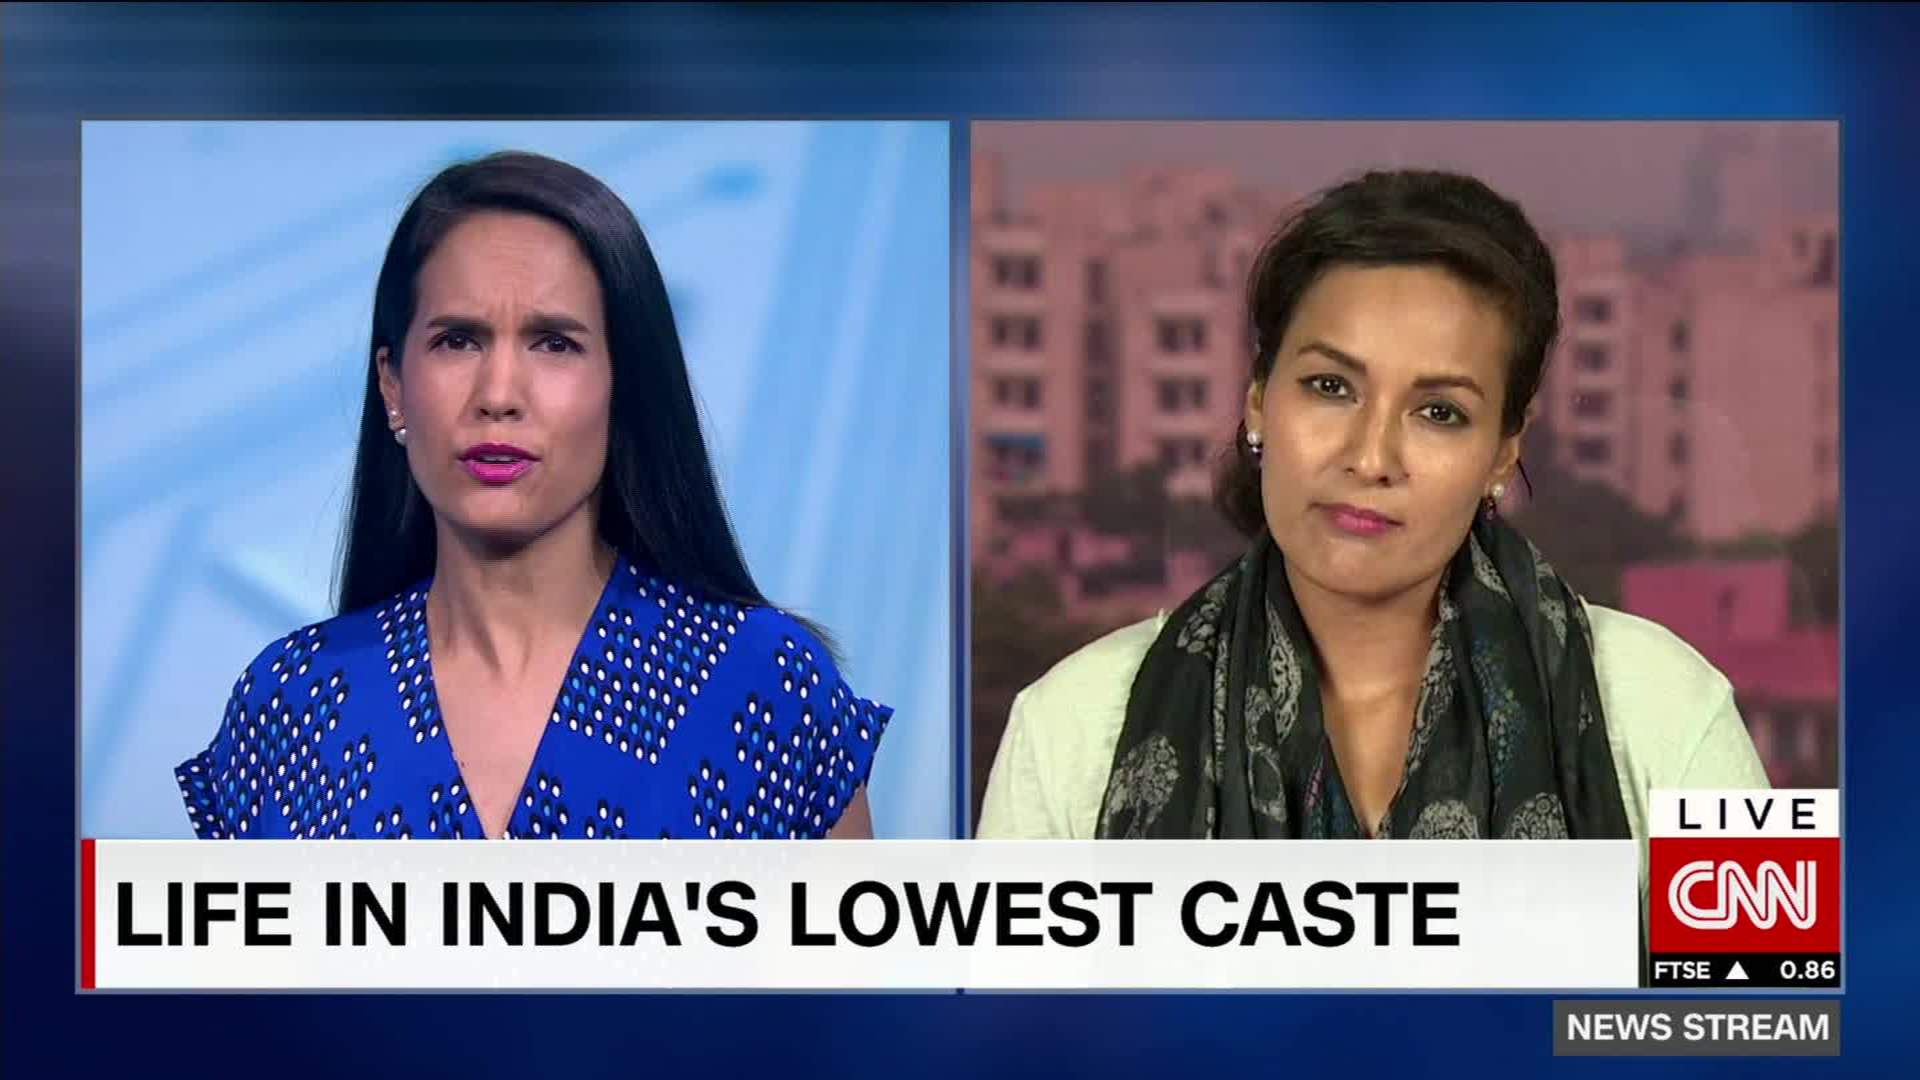 Real Rape Porn Video Indian Car - India: 14-year-old girl dies in second shocking double rape case | CNN